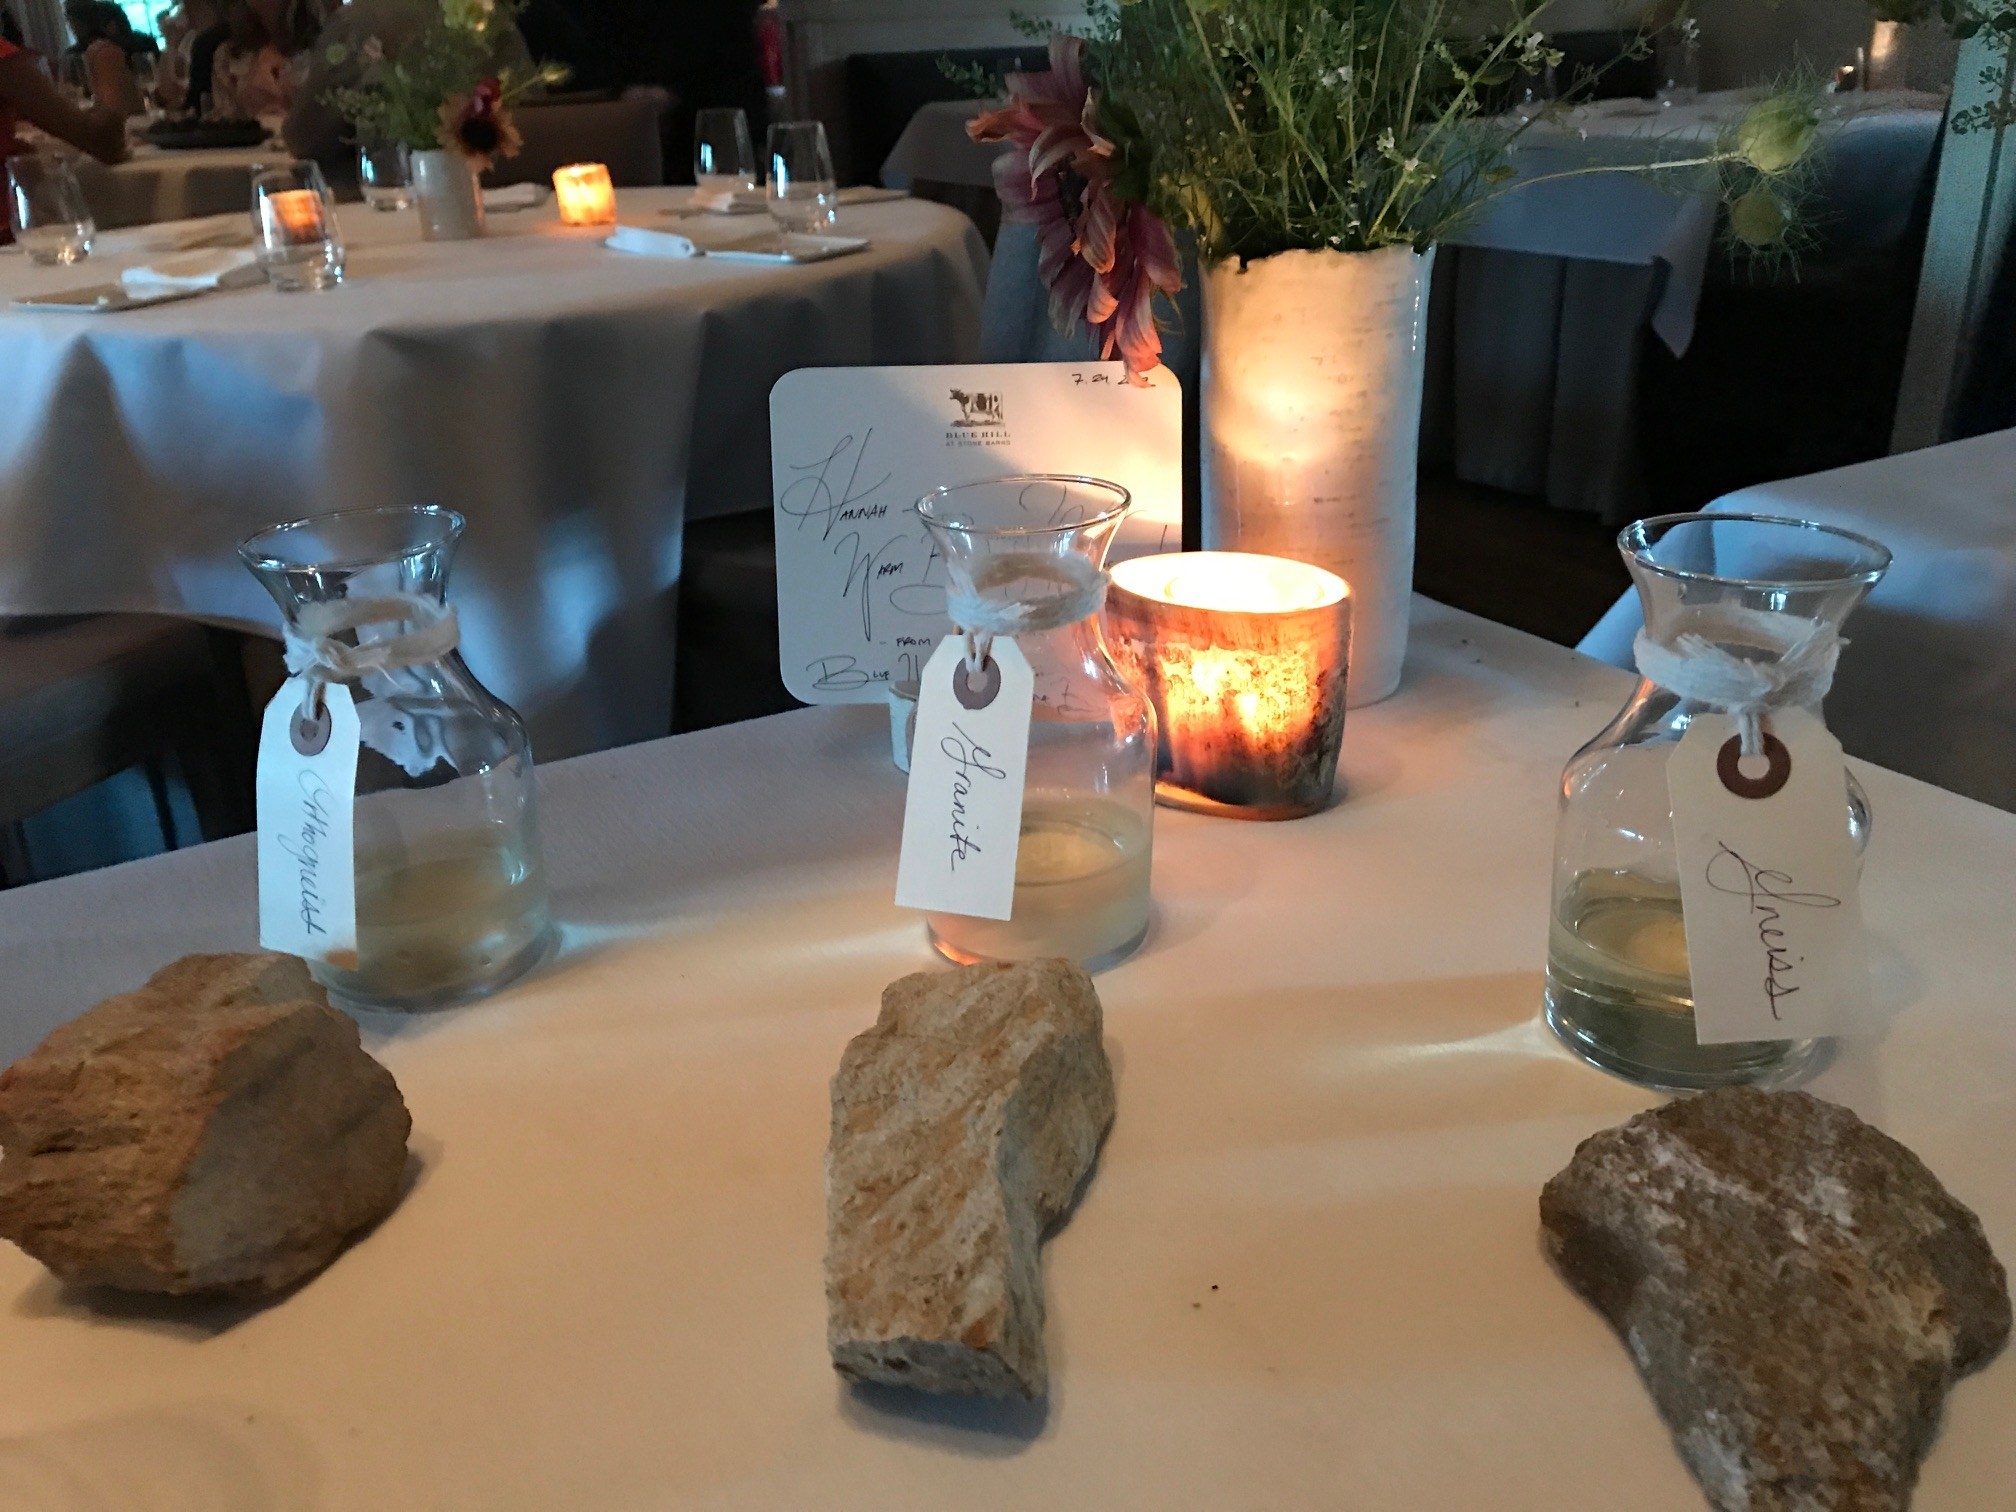 Three carafes of white wine with rocks depicting the type of soil they are grown in